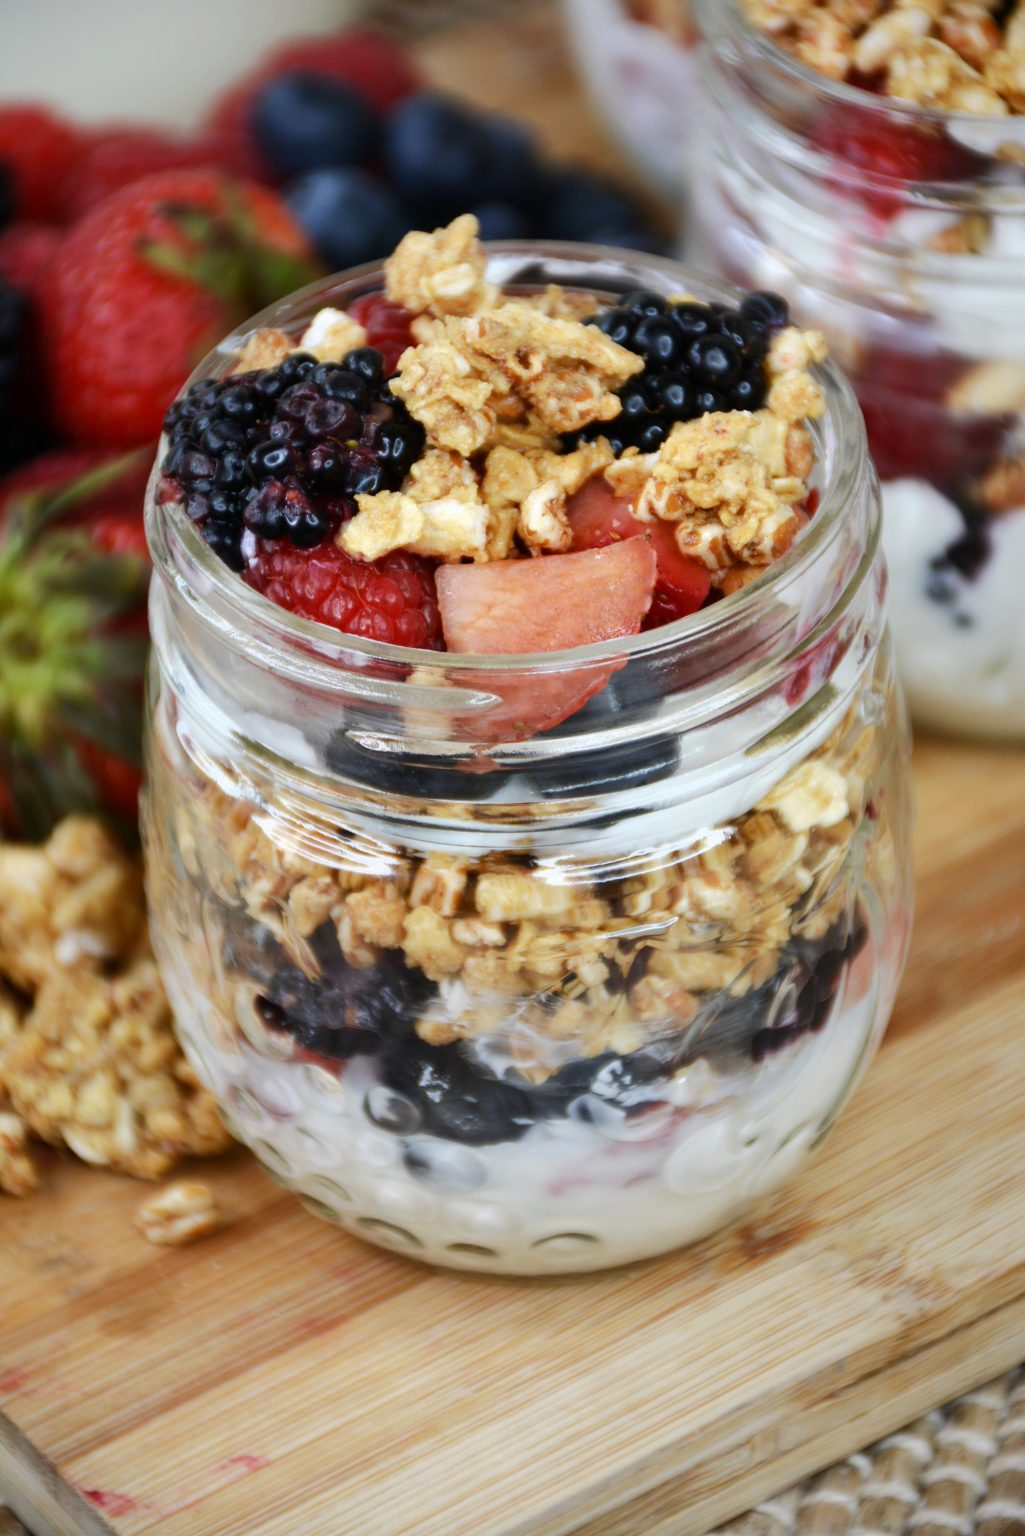 Fruit and Yogurt Parfait - From Gate To Plate